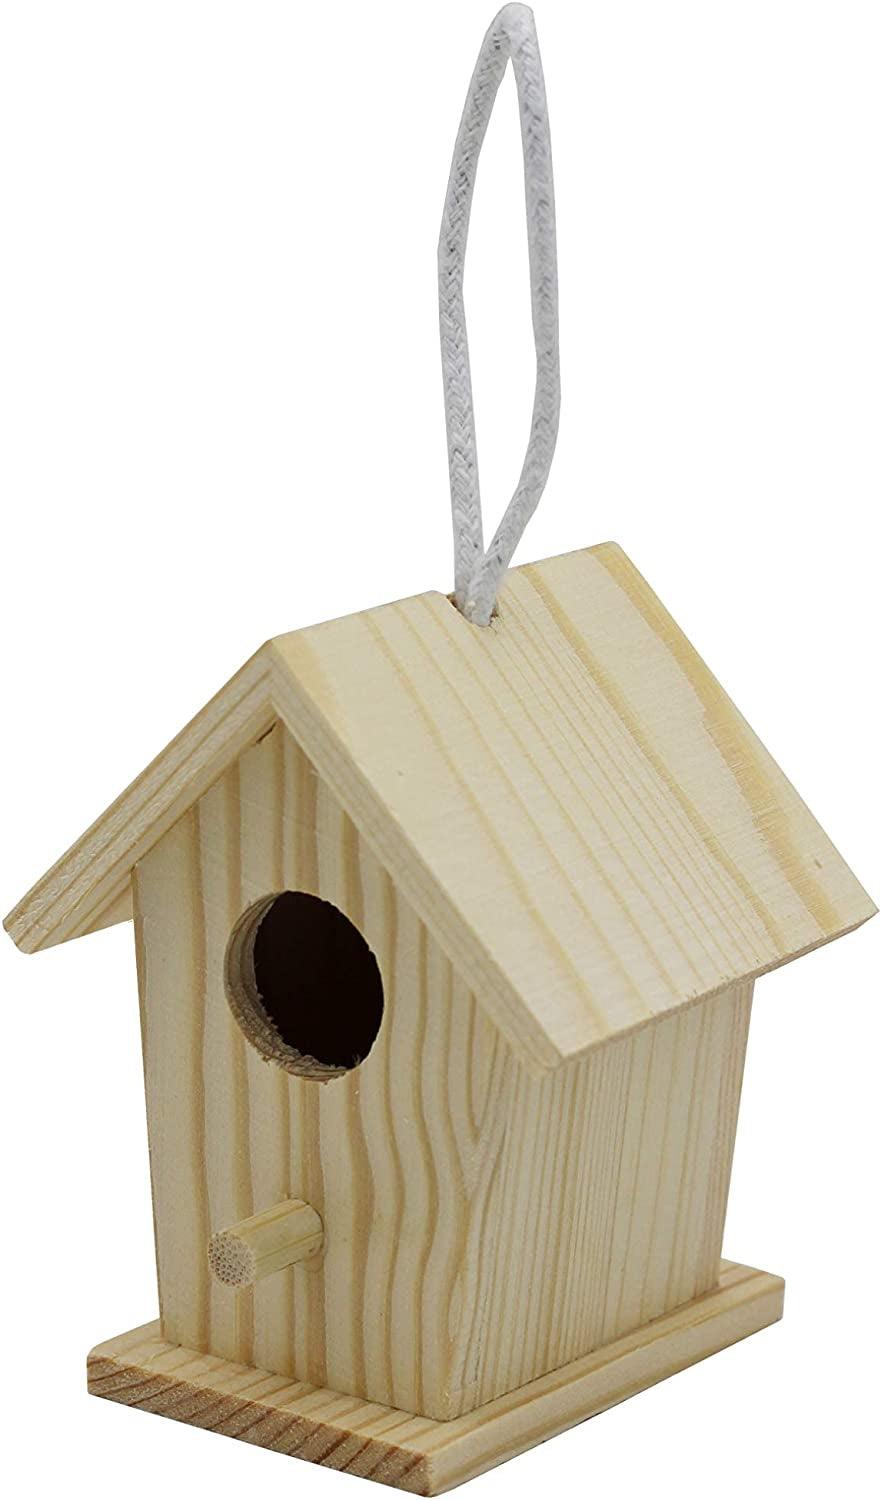 12-Pack of Mini Wooden Bird Houses to Paint, with Hanging Cords, Unfinished DIY Design Your Own - WoodArtSupply